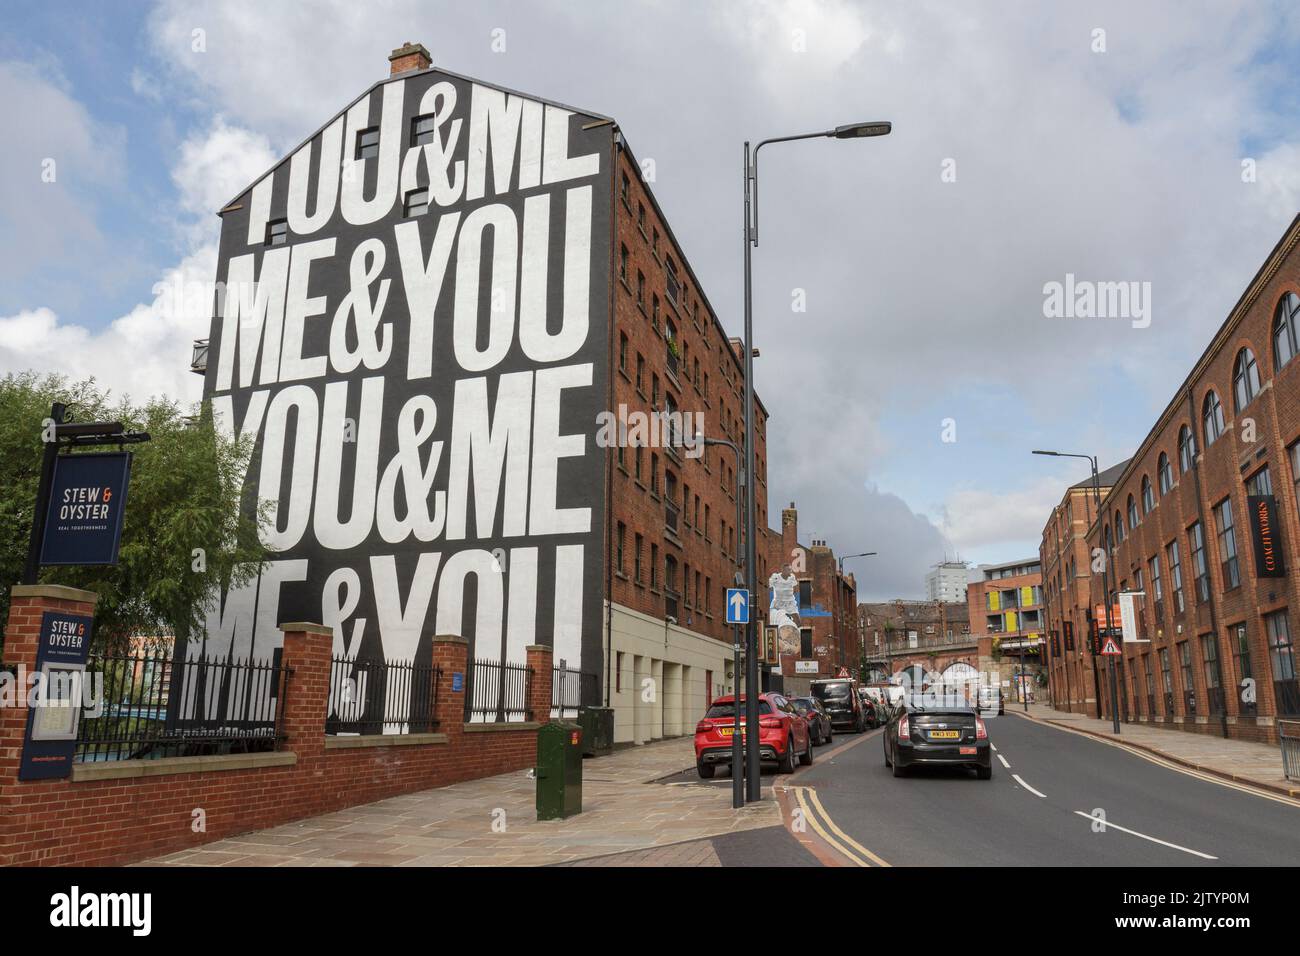 Murals on the sides of former warehouses in the Calls Landing area of Leeds, West Yorkshire, UK. Stock Photo